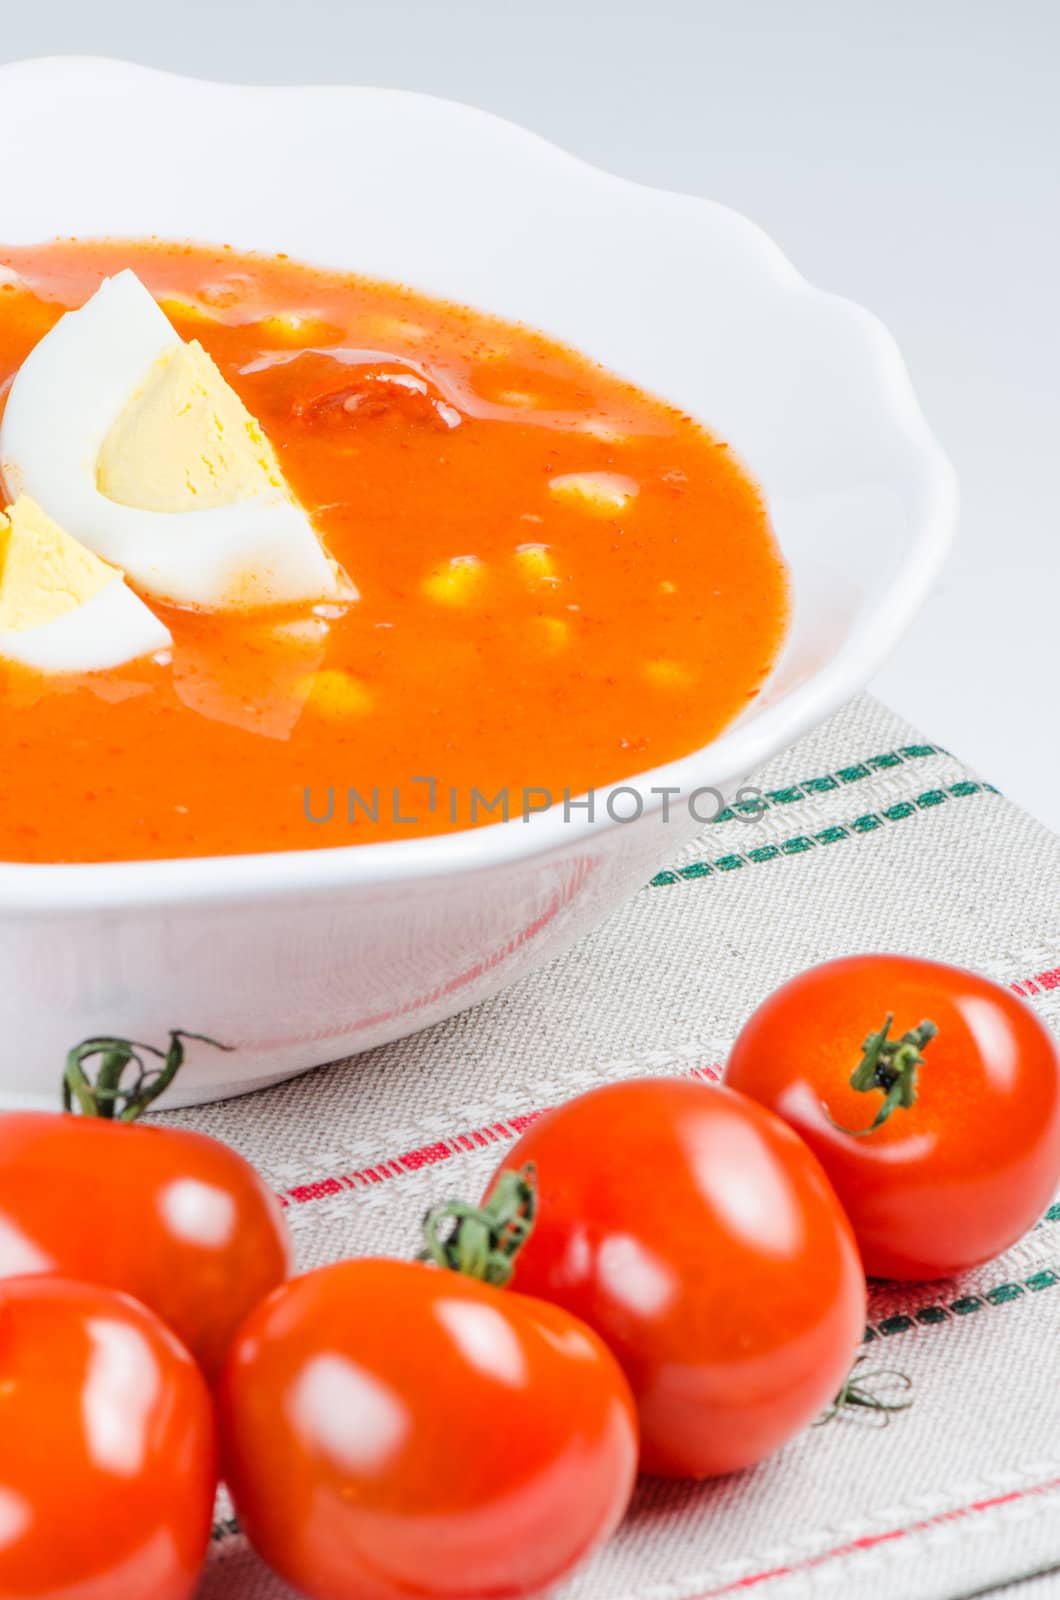 Tomato soup with eggs in white bowl on napkin close up